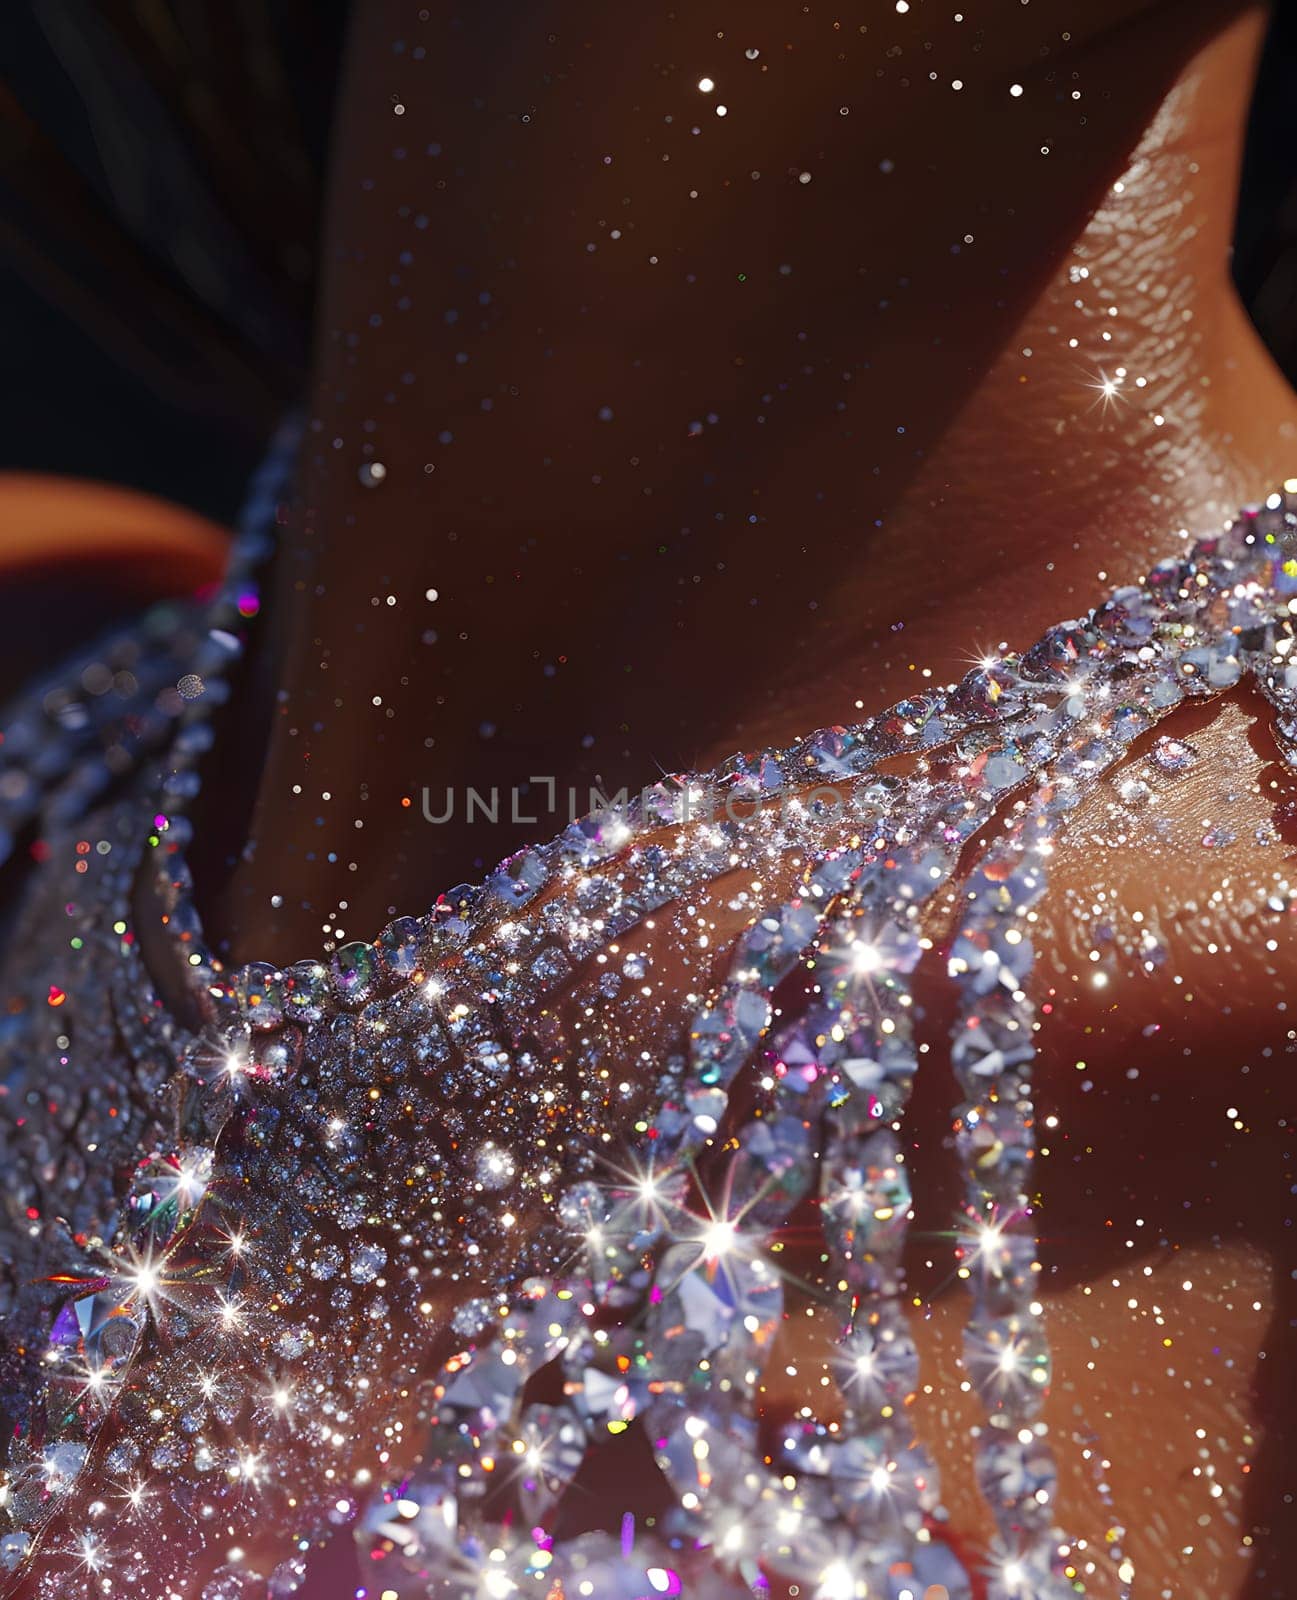 A closeup image of a womans finger delicately tracing the electric blue rhinestones on her necklace, the glitter reflecting the moisture in the air